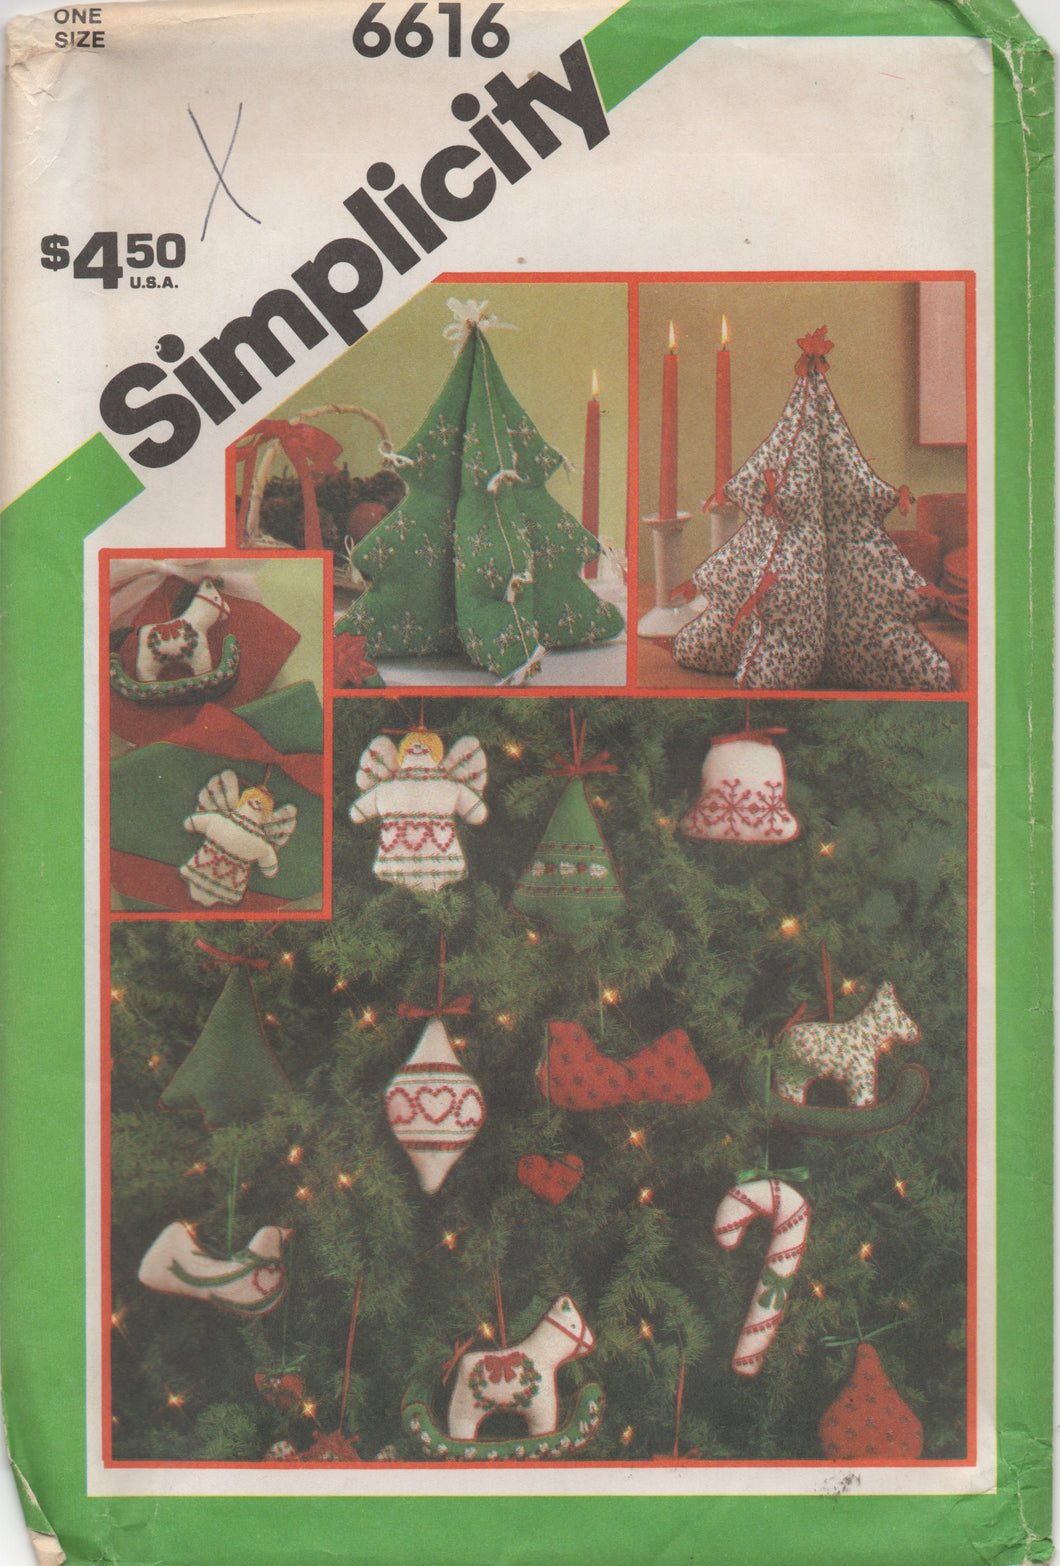 1980's Simplicity Christmas Crafts (Candlewicking Ornaments, Stuffed tree) - One Size - No. 6616